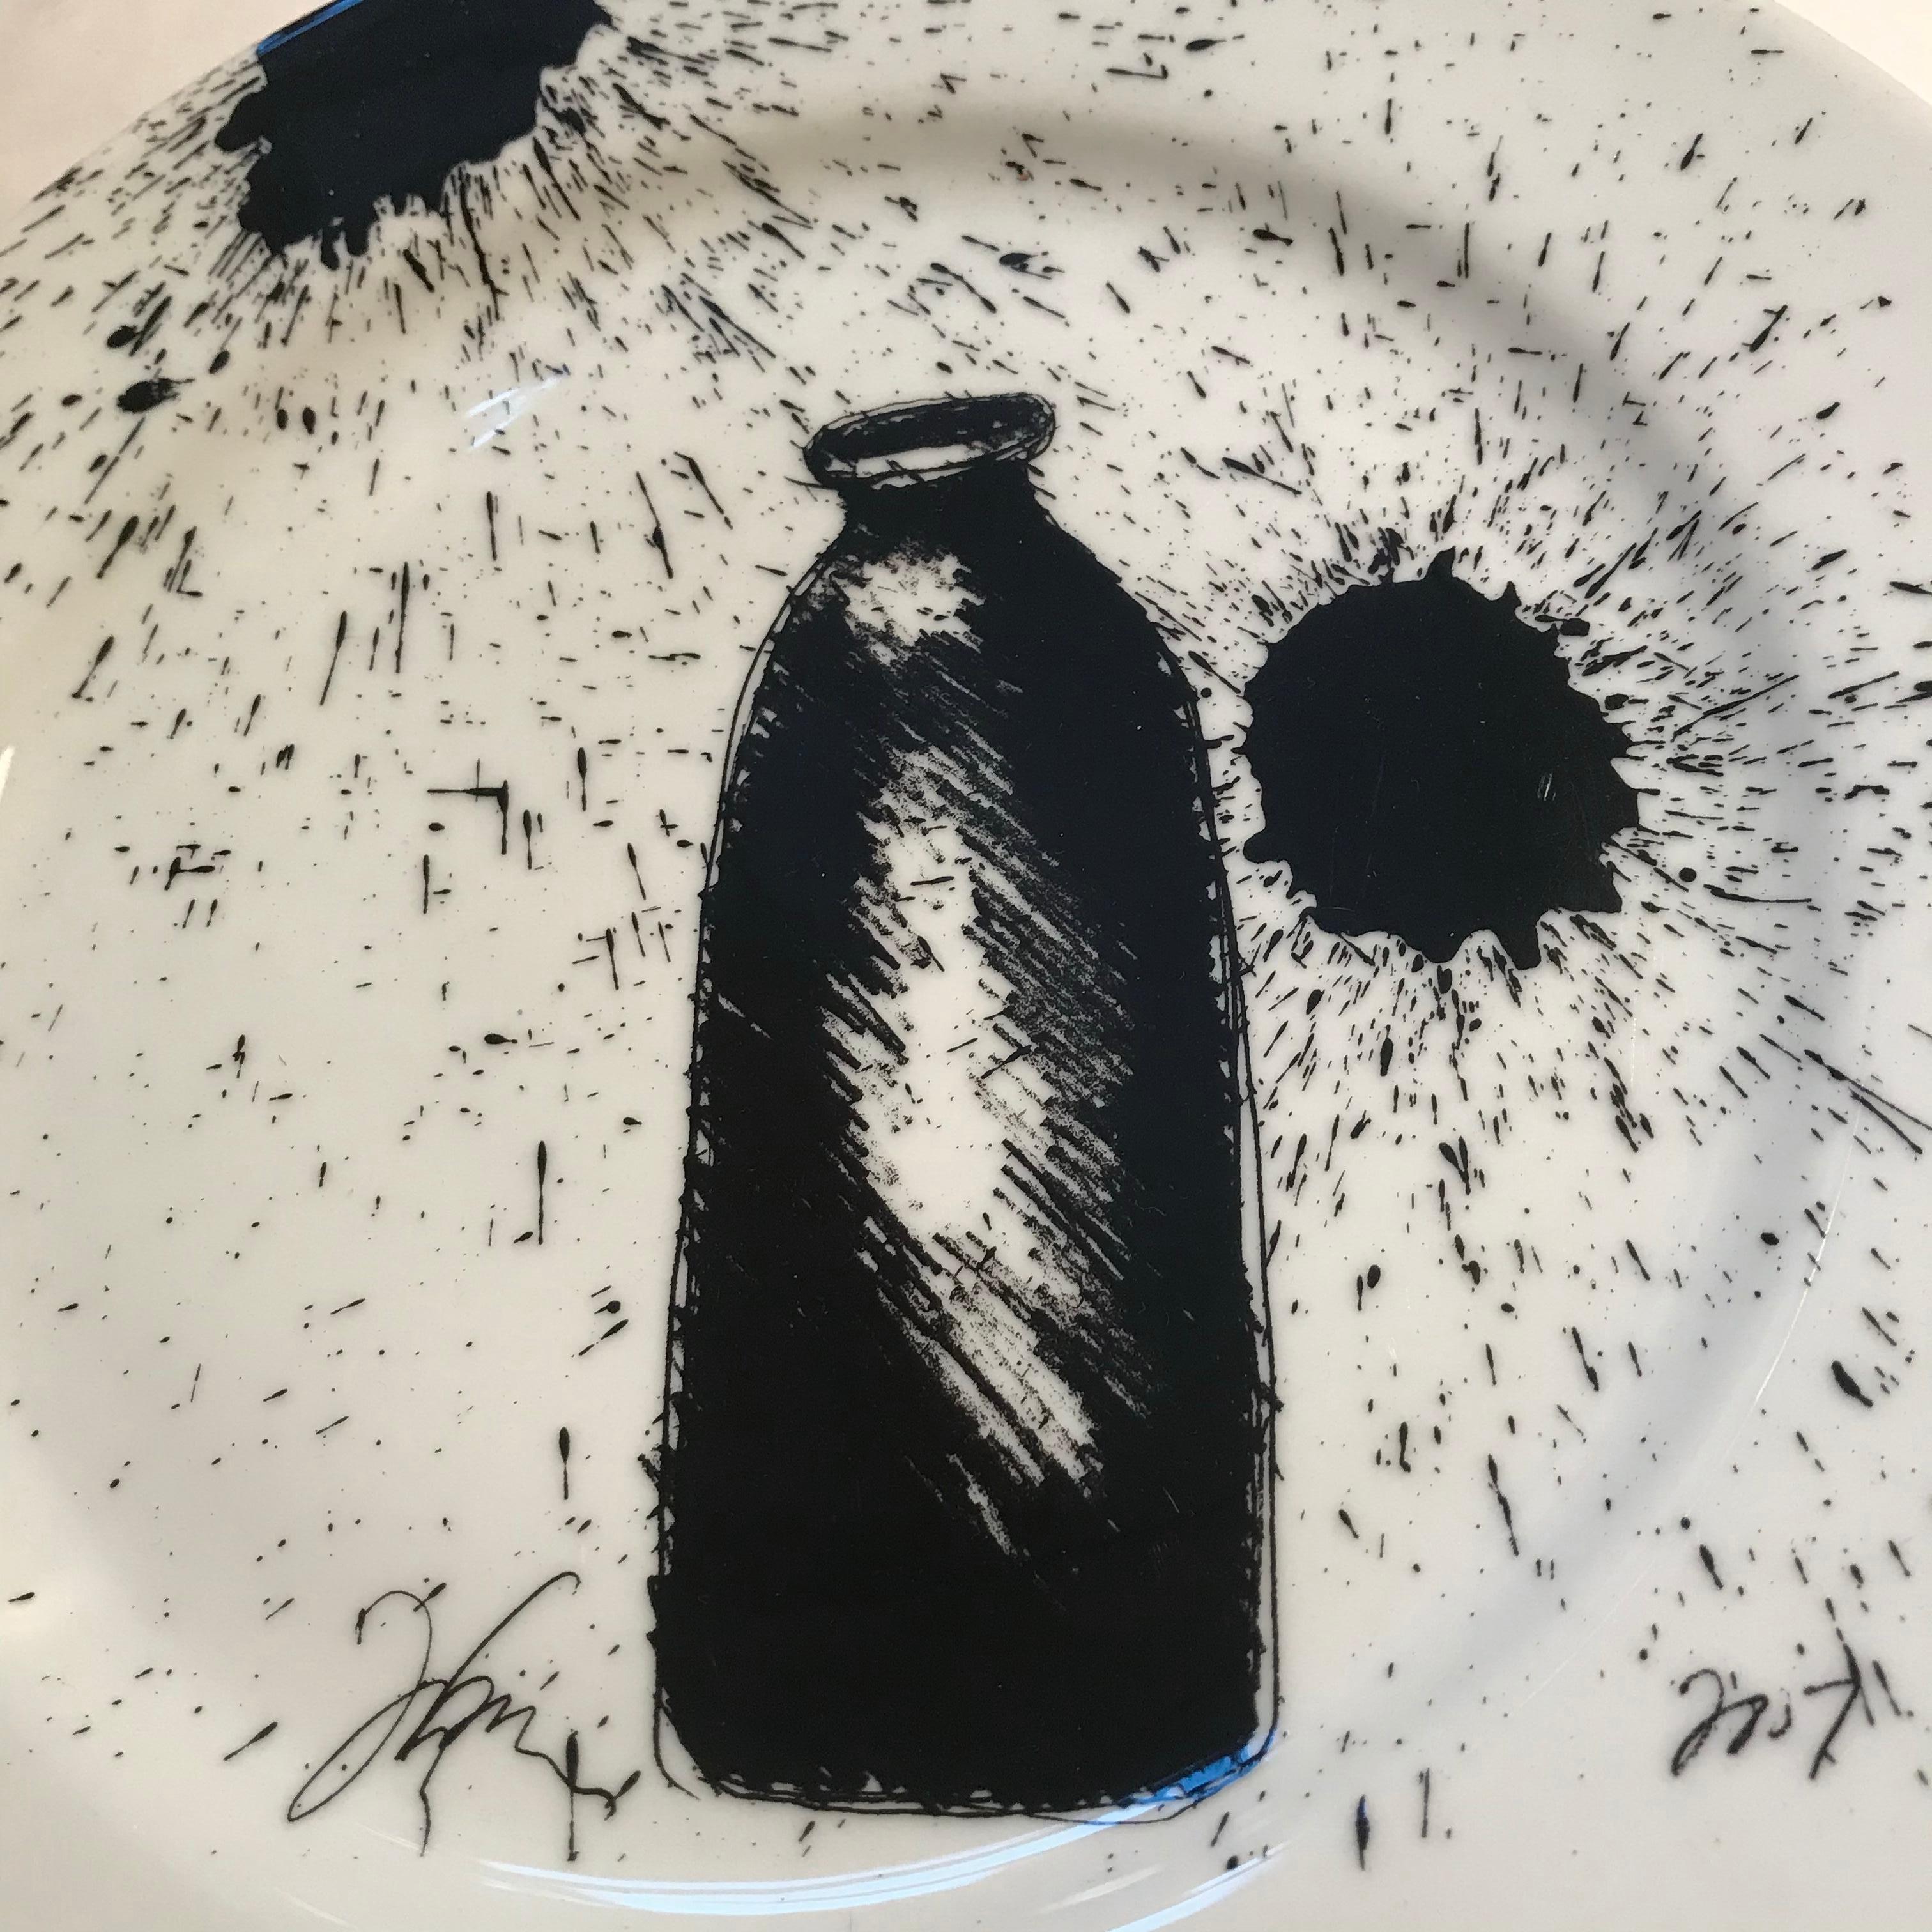 Ceramic plate designed by artist Joe Goode. Produced on the occasion of the Santa Monica Museum of Art’s 20th anniversary. Edition of 125 Plate signed; numbered and stamped with artist signature and SMMOA 20th Anniversary stamp to the verso.